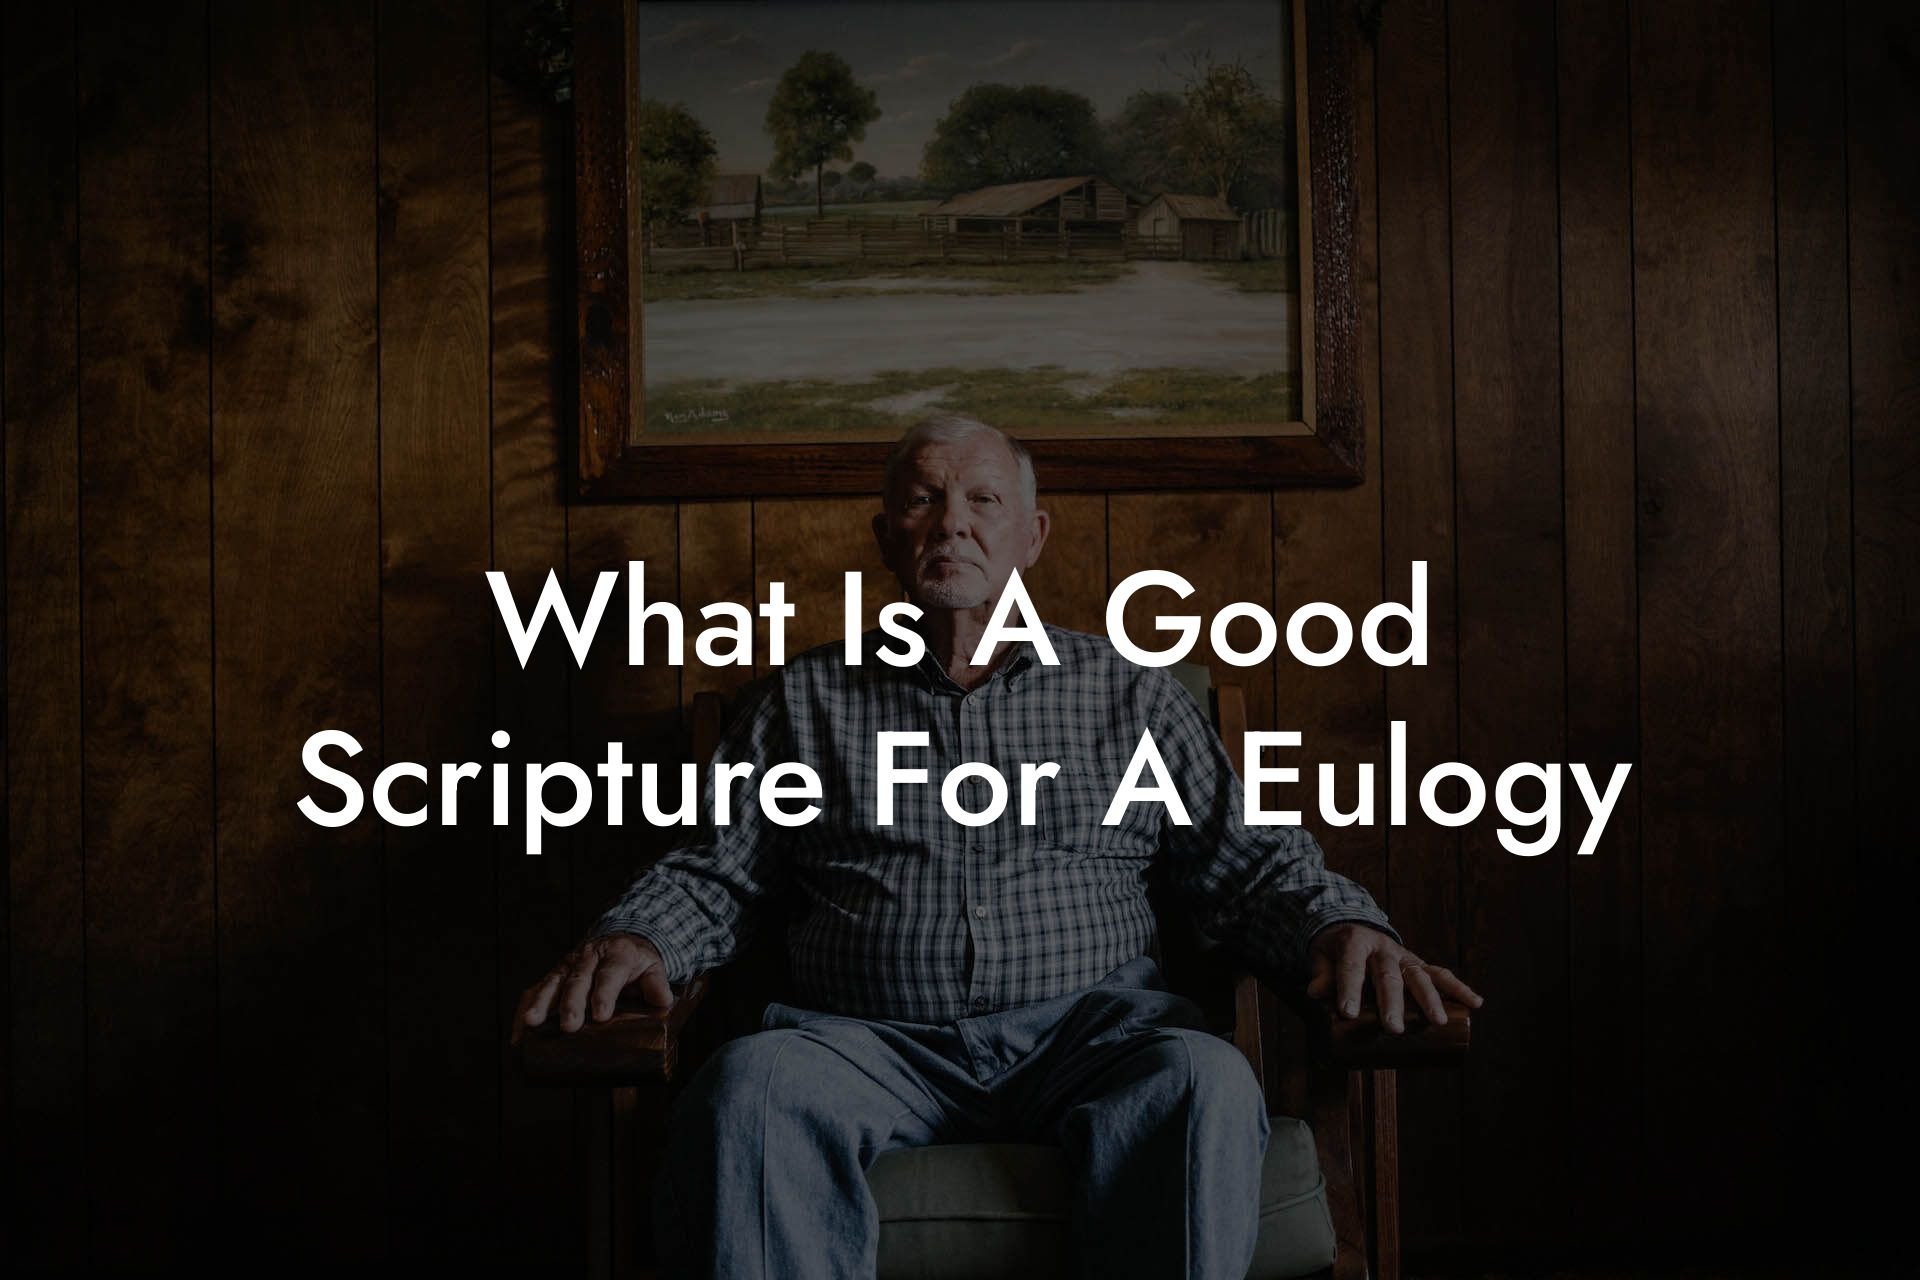 What Is A Good Scripture For A Eulogy